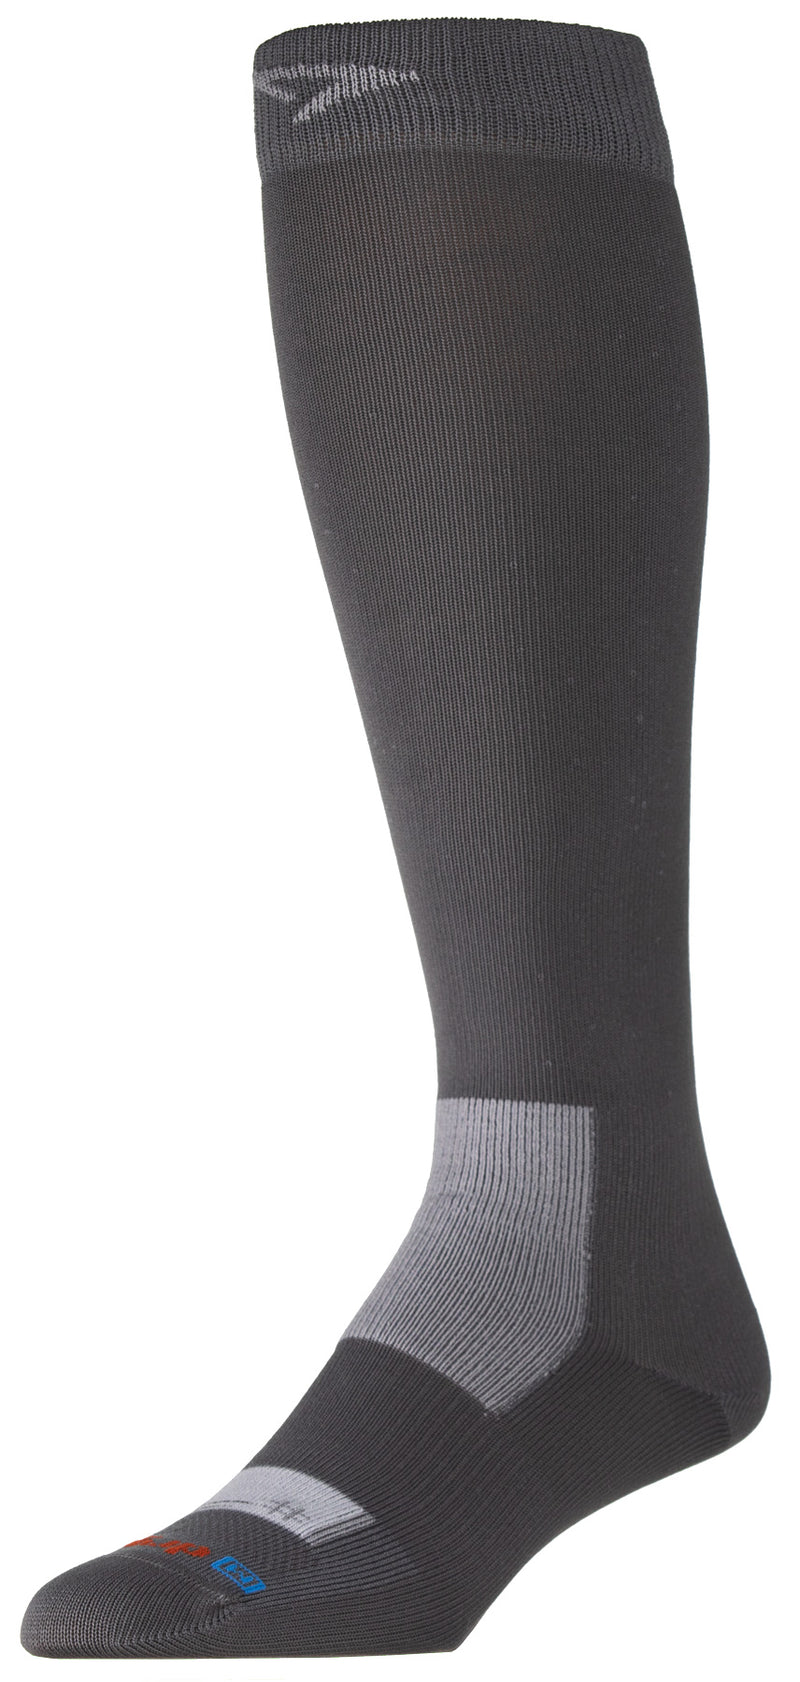  2XU Men's Compression Socks For Recovery, Black/Grey